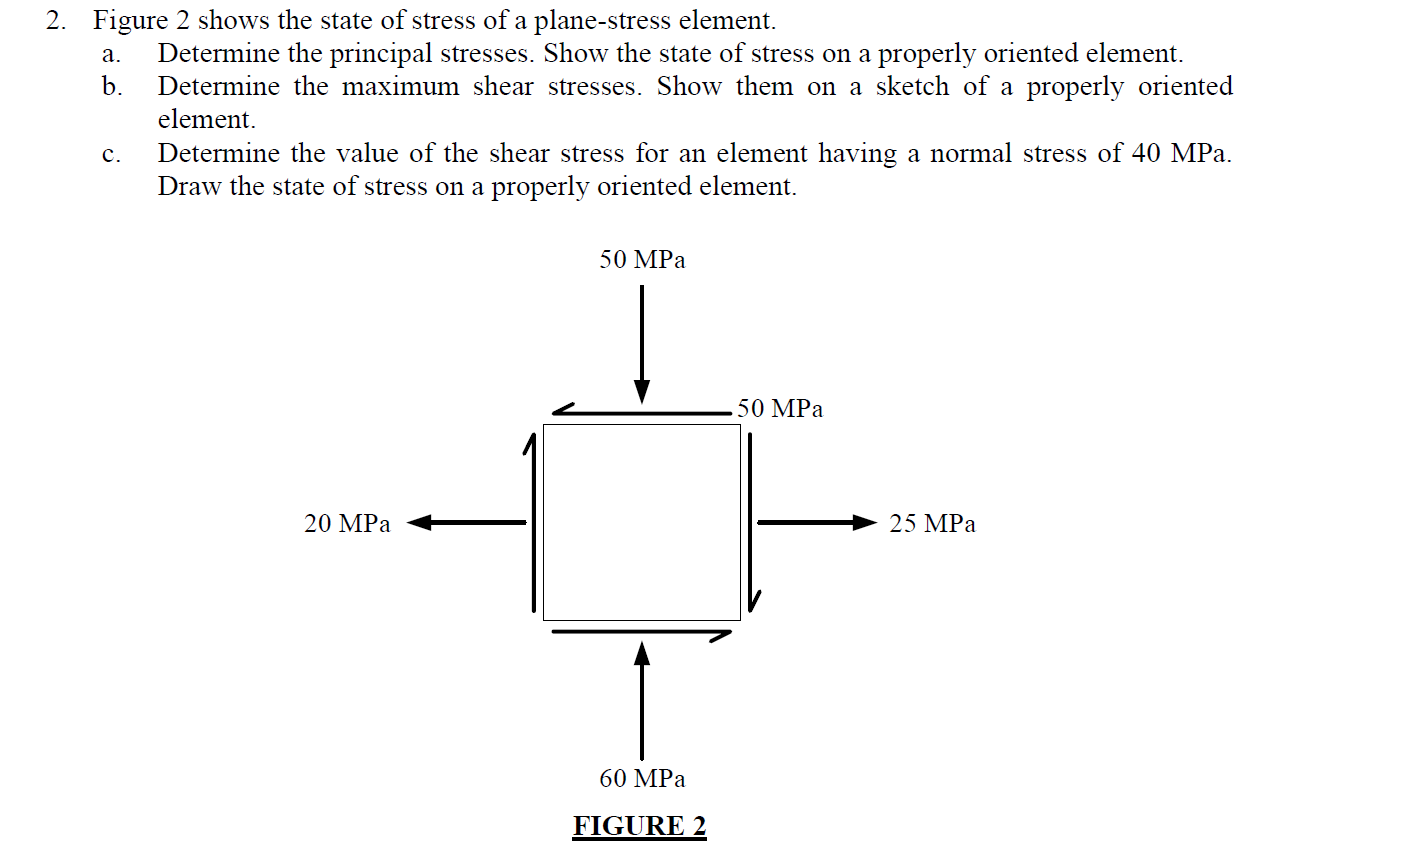 The state of stress on a element in plane stress is shown as in the  figure.What is the value of σ if the values of the principal stresses are  164 N/mm2 and